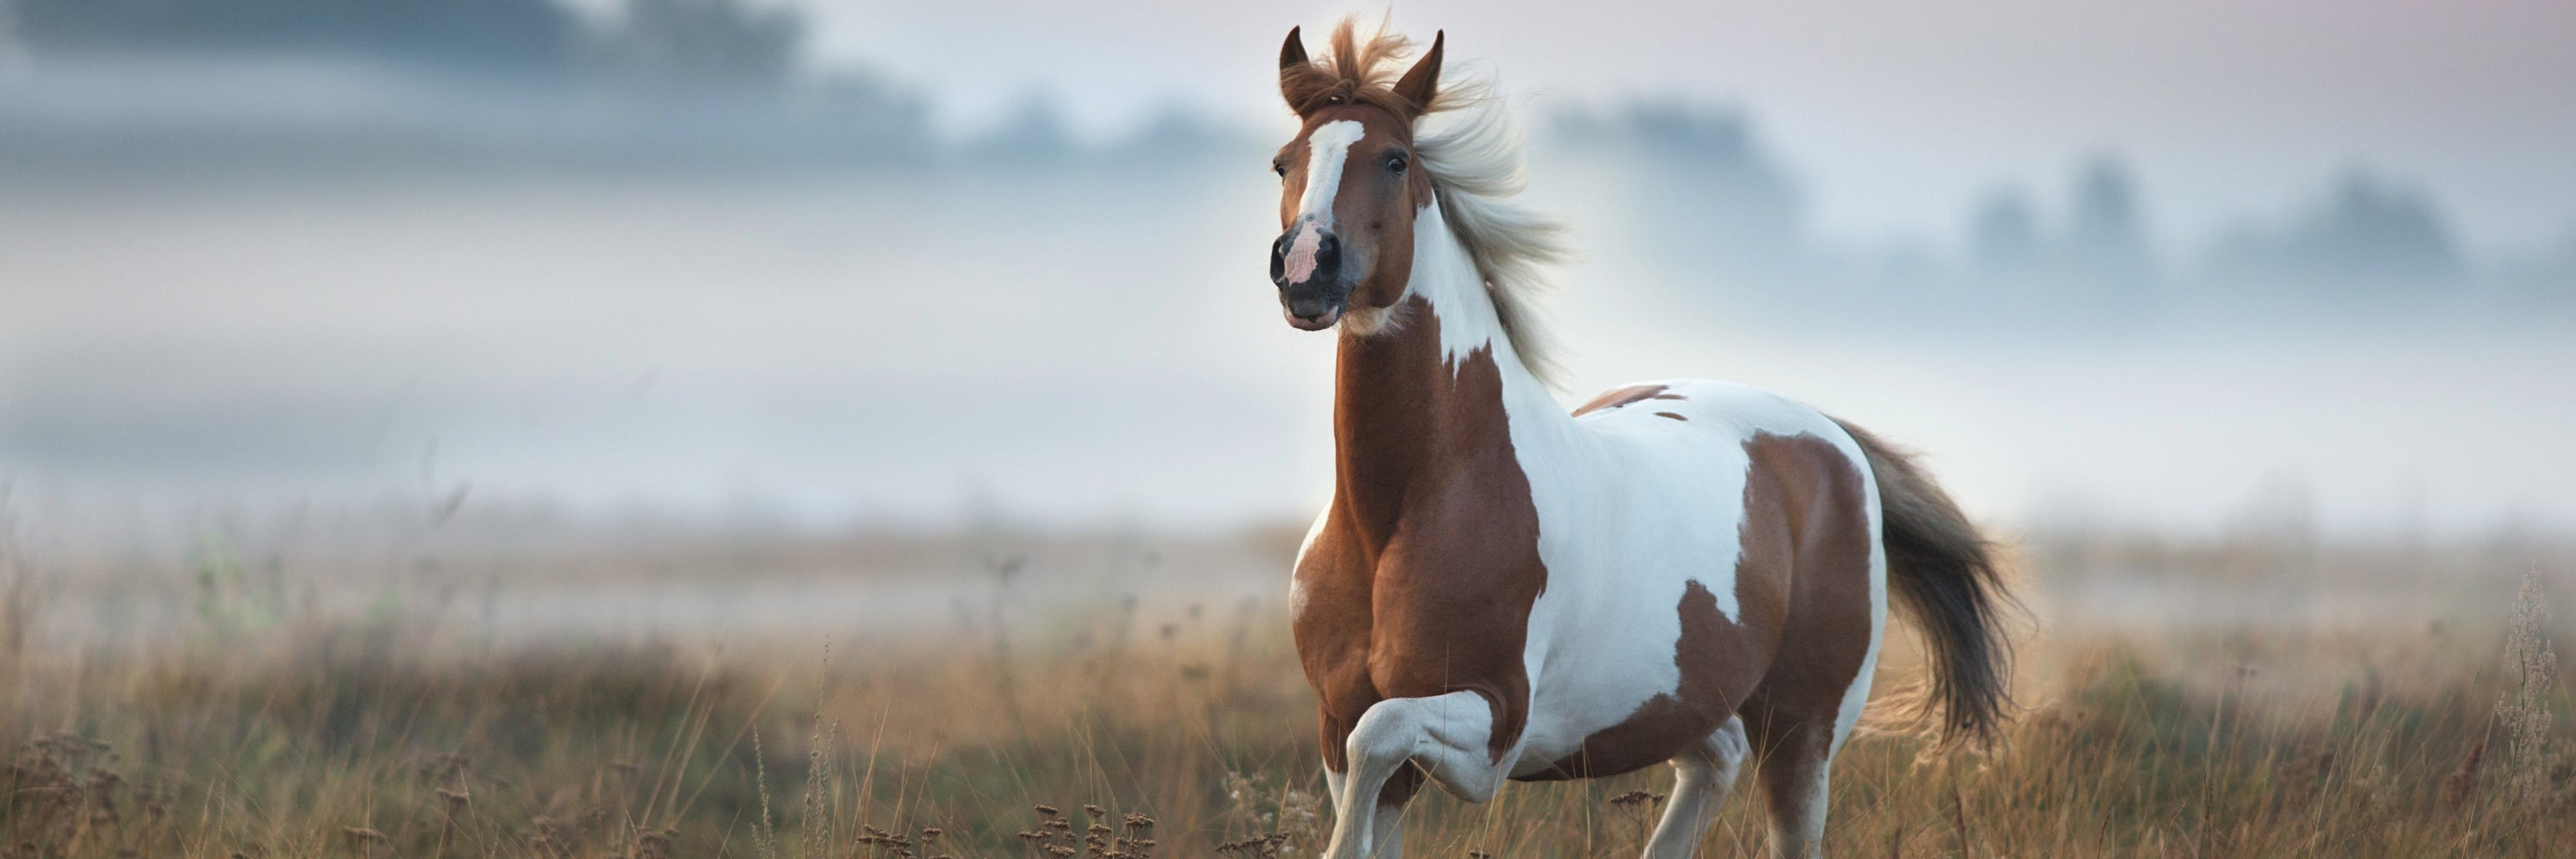 Healthy Horse Running through foggy meadow. Immune Support for Horses	Horse immune System Supplements, Equine Immune Support